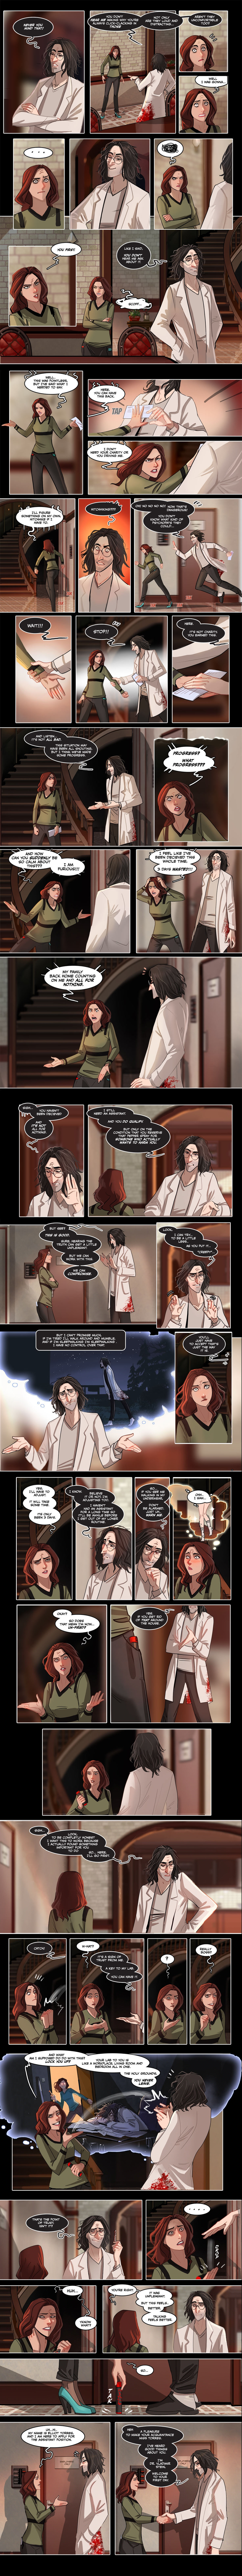 Blood Stain ch. 4 (ongoing) [Linda Sejic / Sigeel] 7